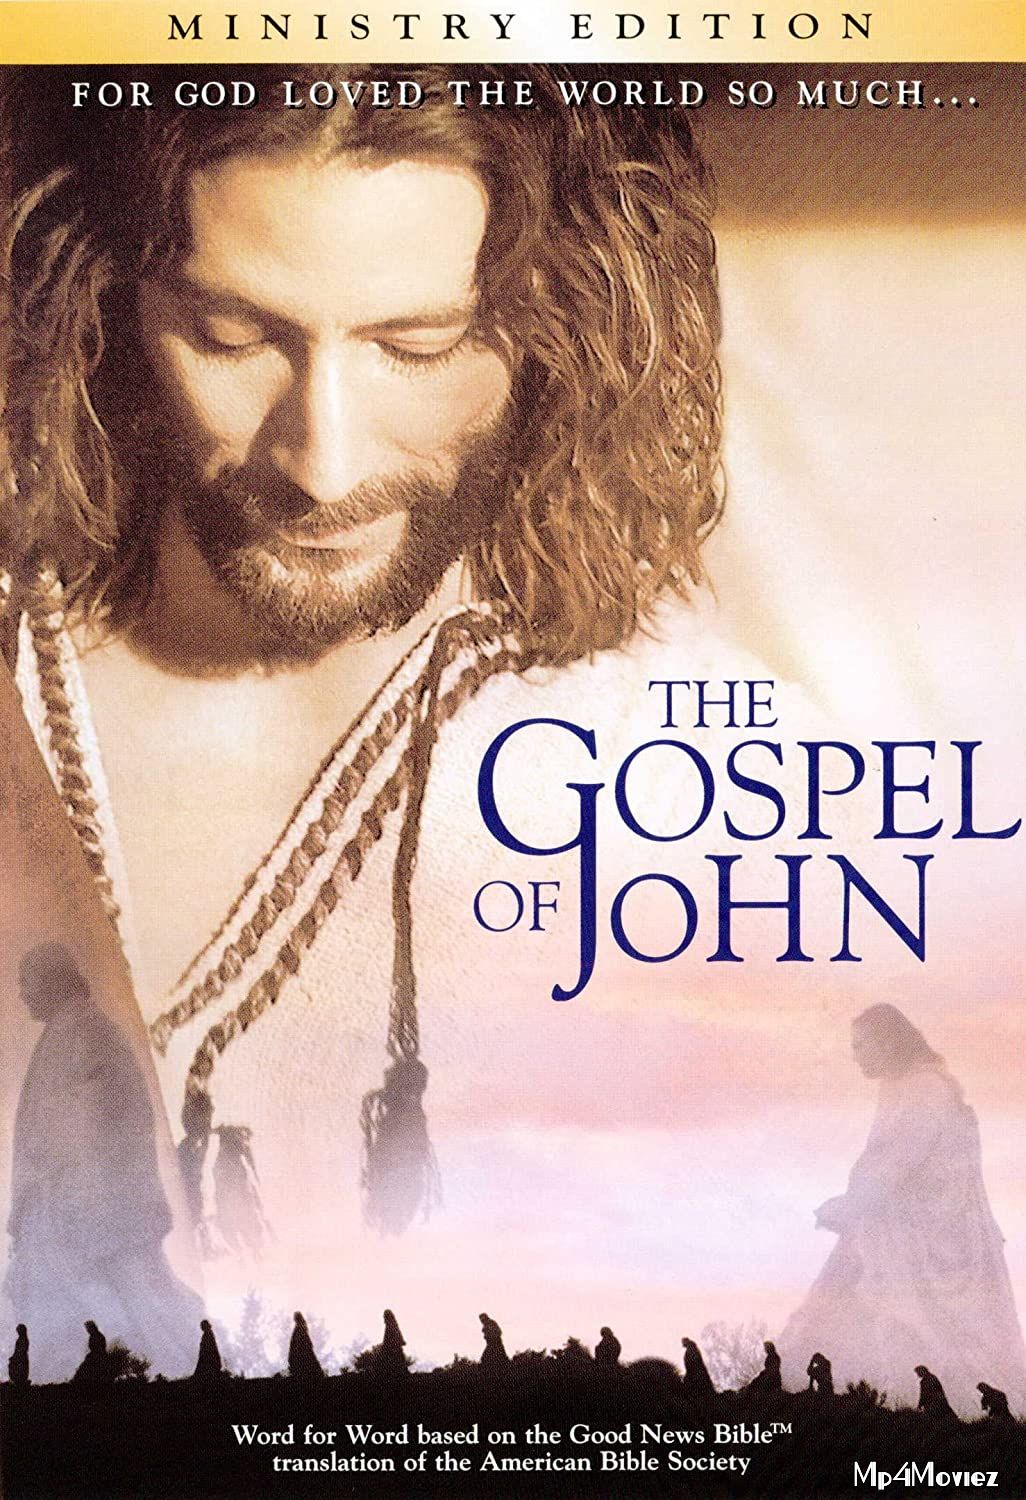 The Visual Bible: The Gospel of John 2003 Hindi Dubbed Movie download full movie